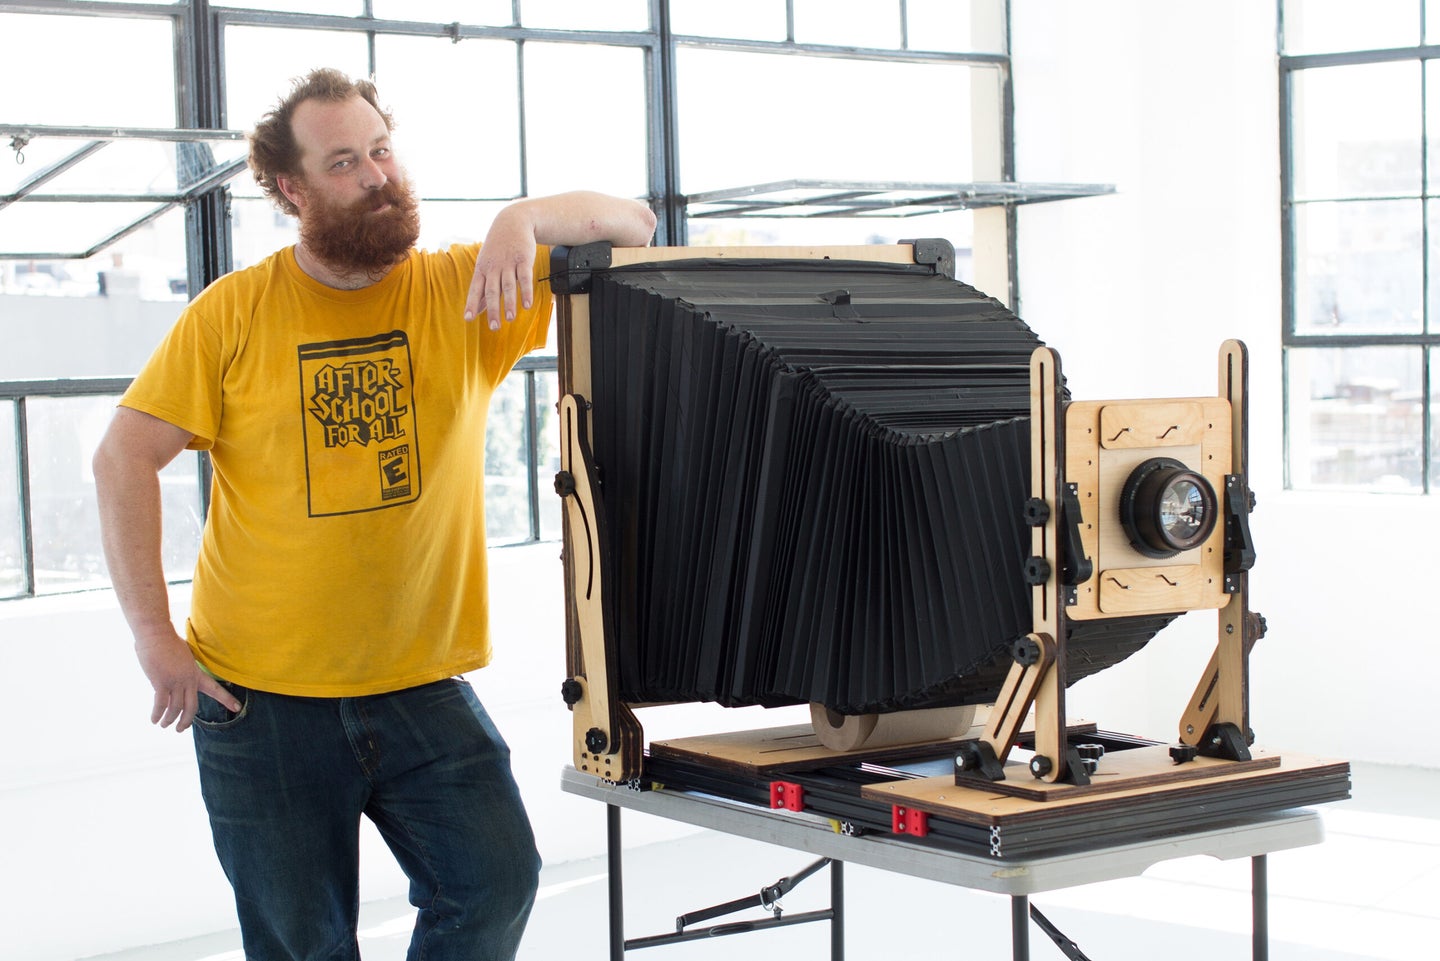 Ethan Moses standing next to his homemade giant instant camera.